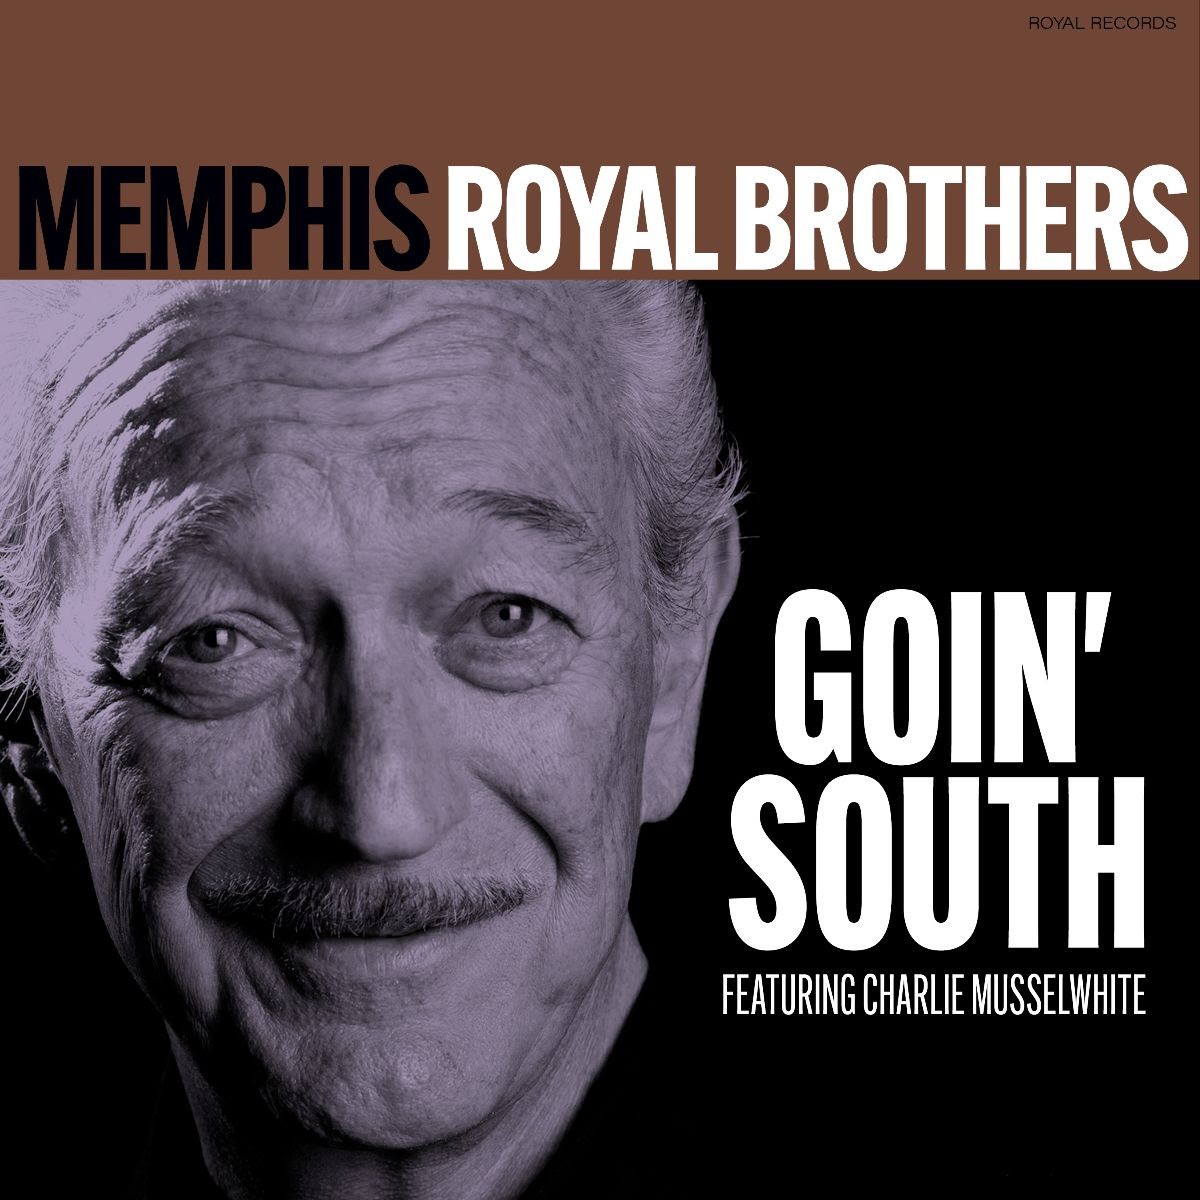 Memphis Royal Brothers - Going South featuring Charlie Musselwhite